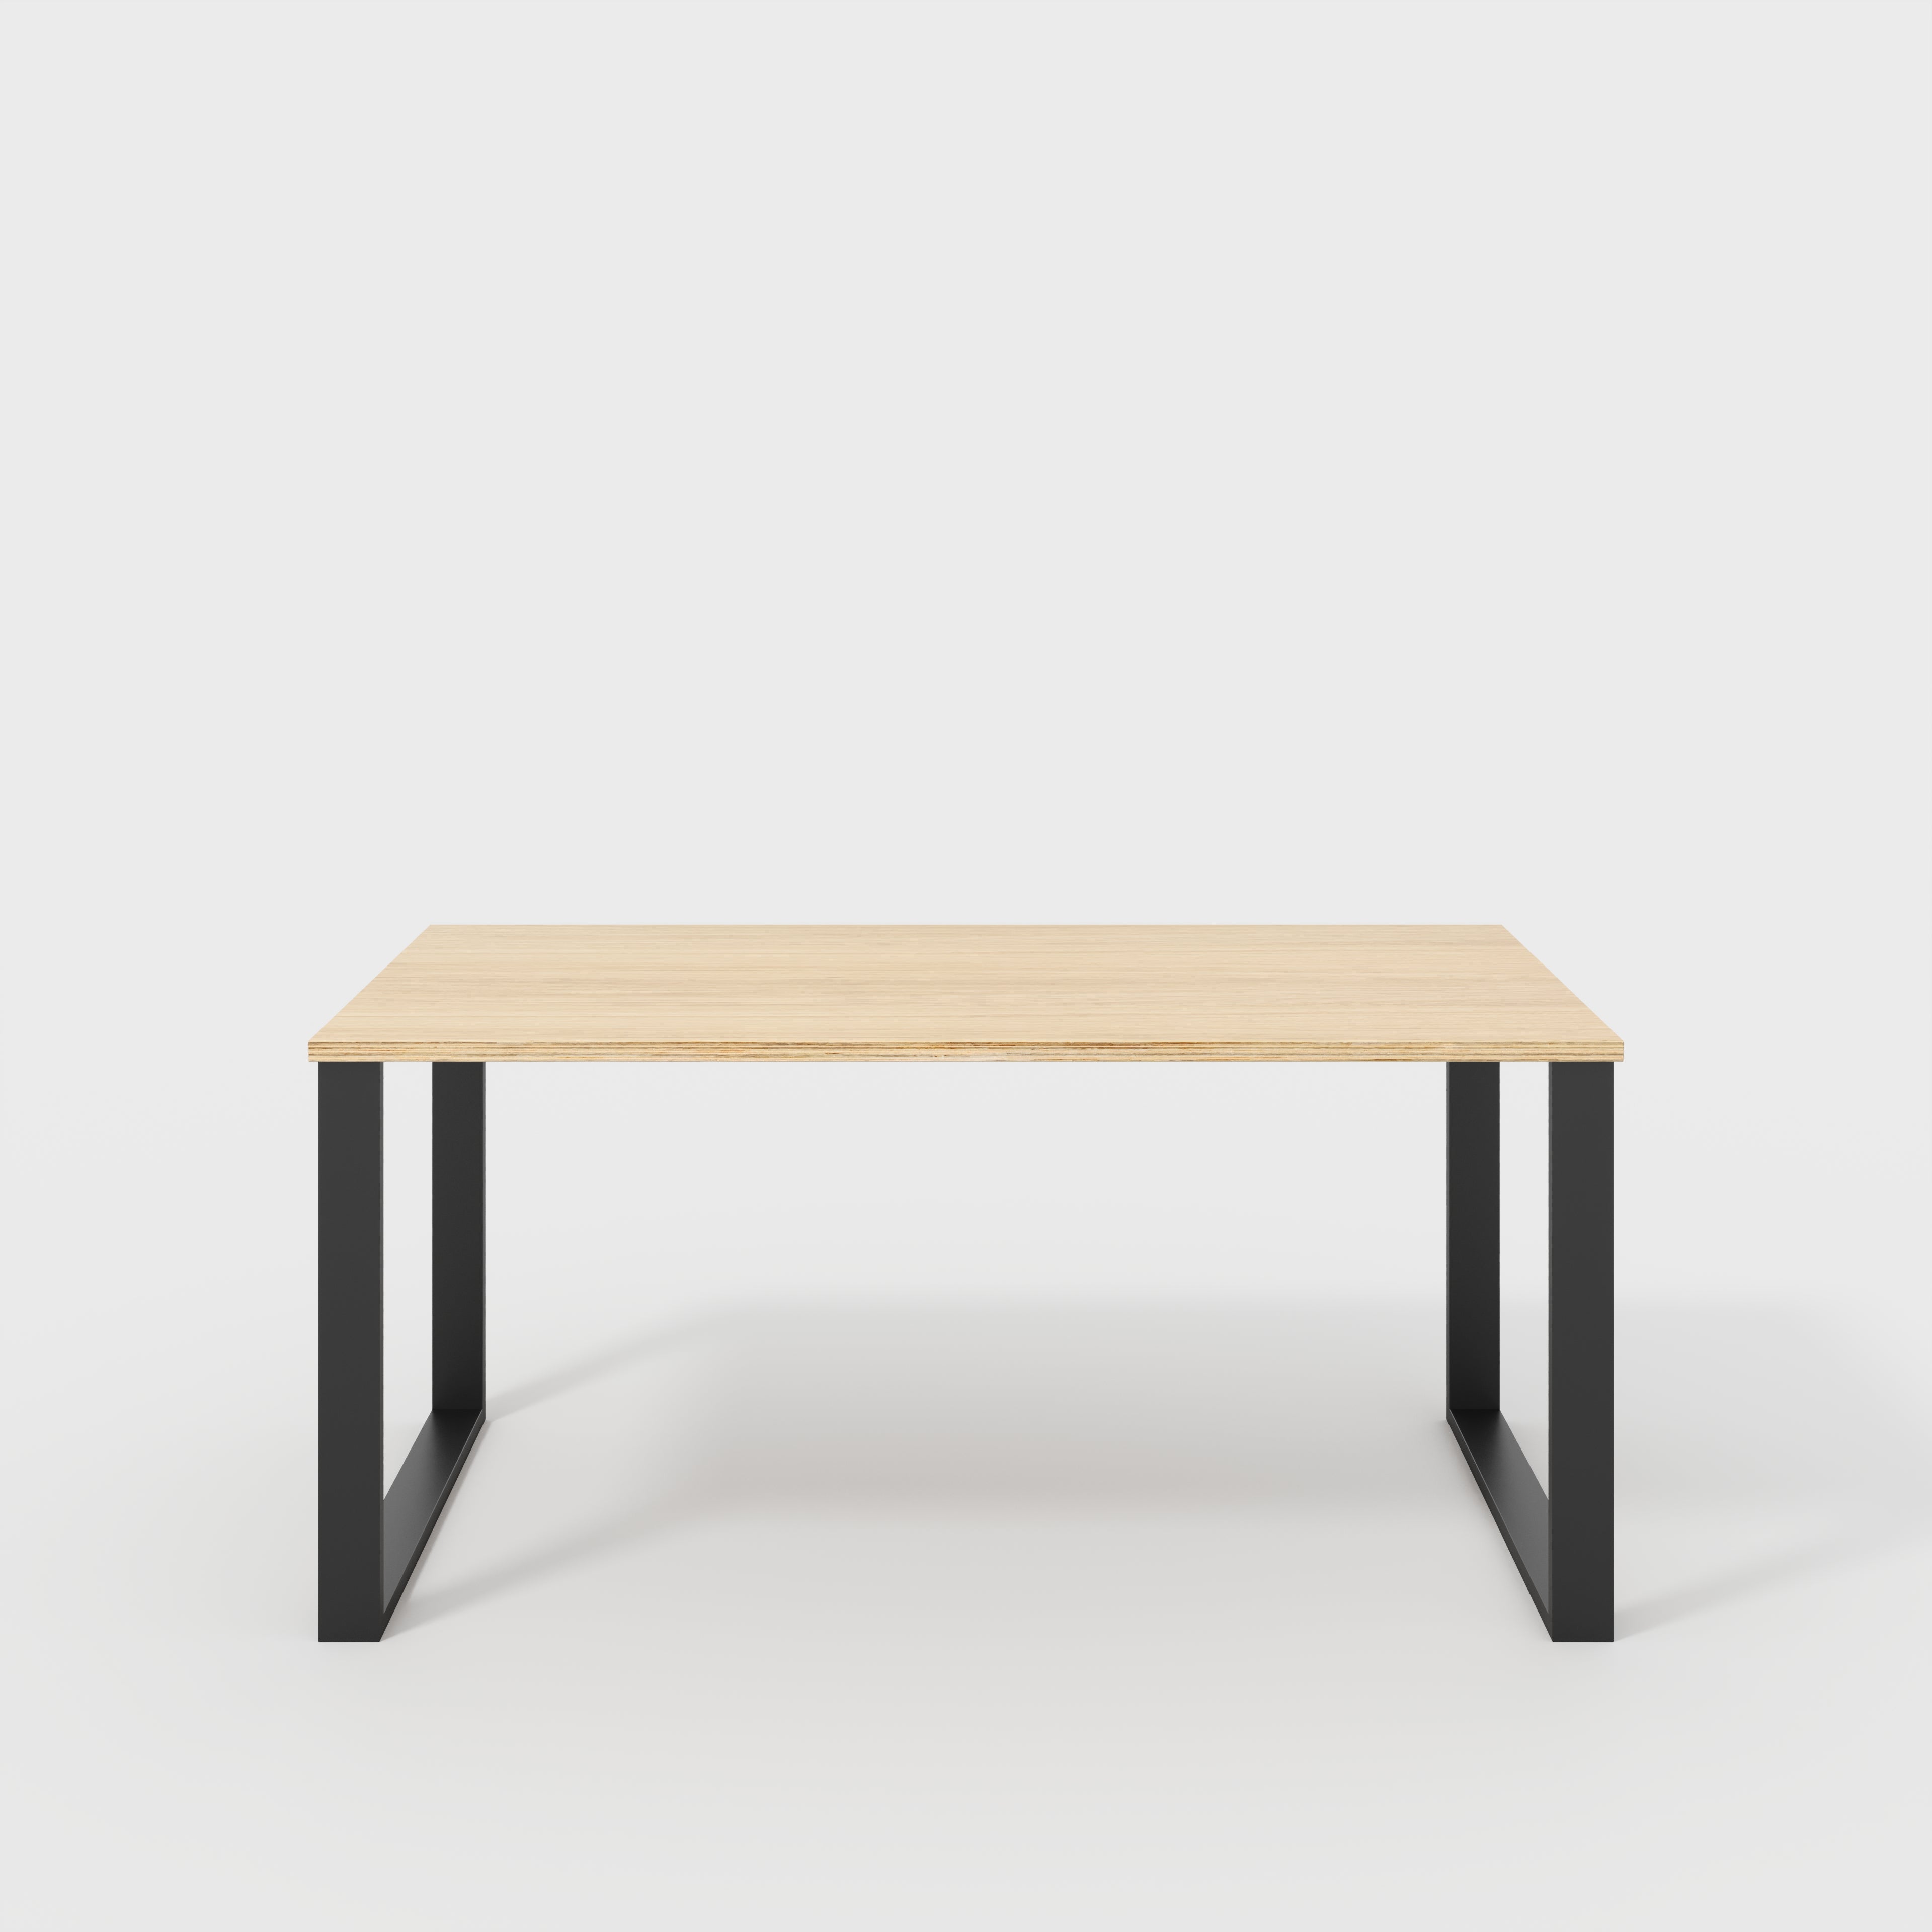 Table with Black Industrial Legs - Plywood Oak - 1600(w) x 800(d)